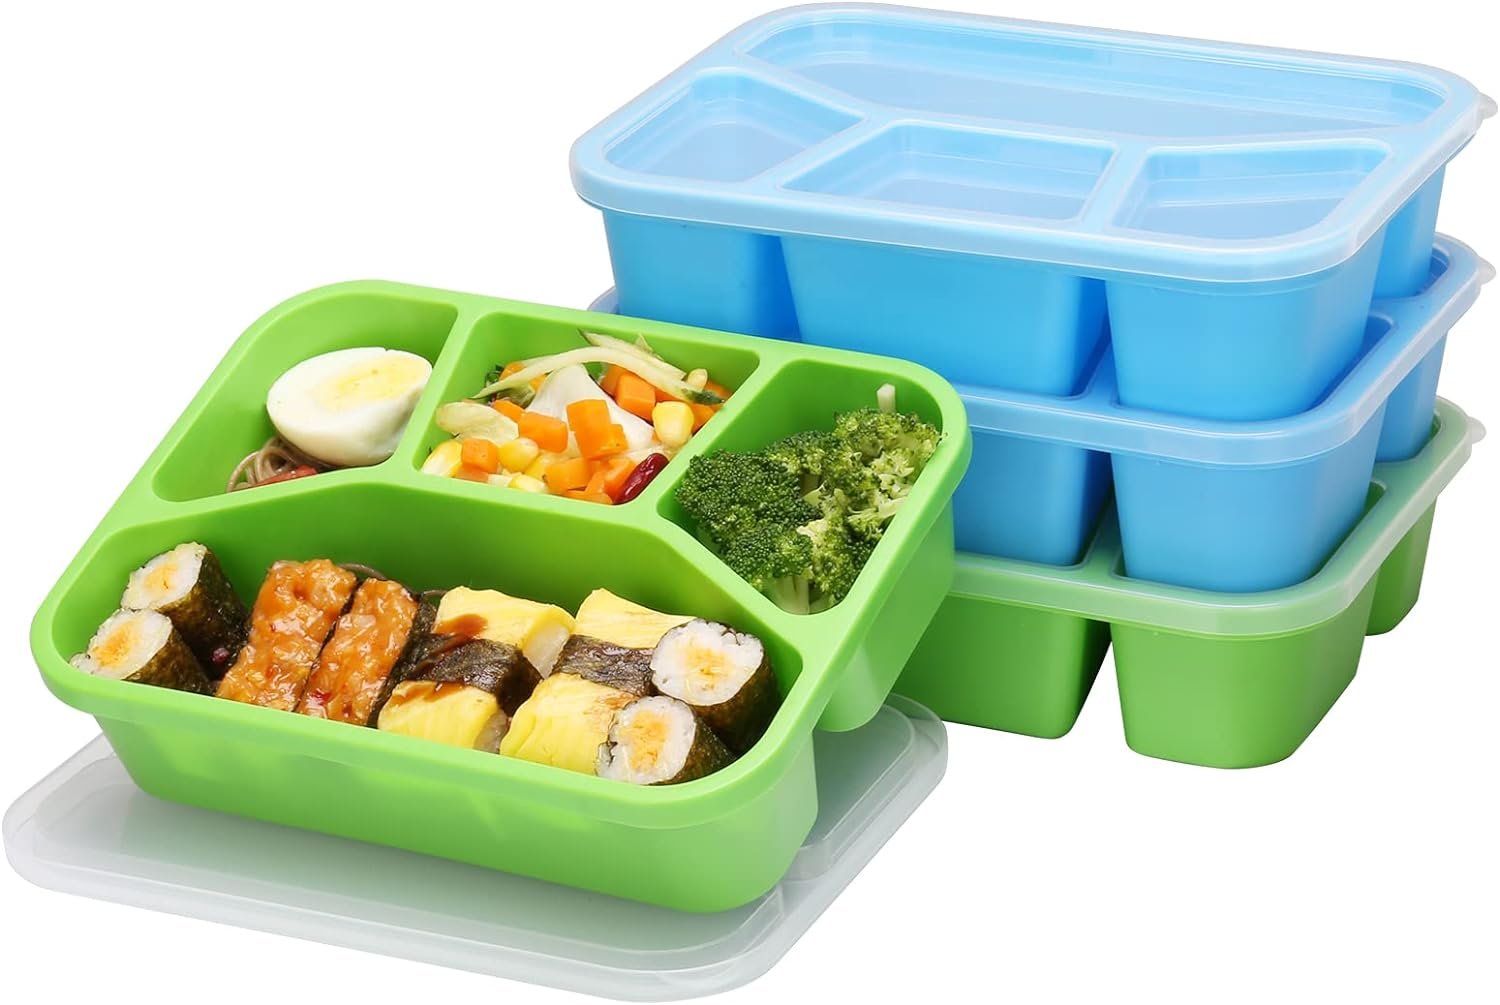 Ylebs Bento Box Lunch Containers Review